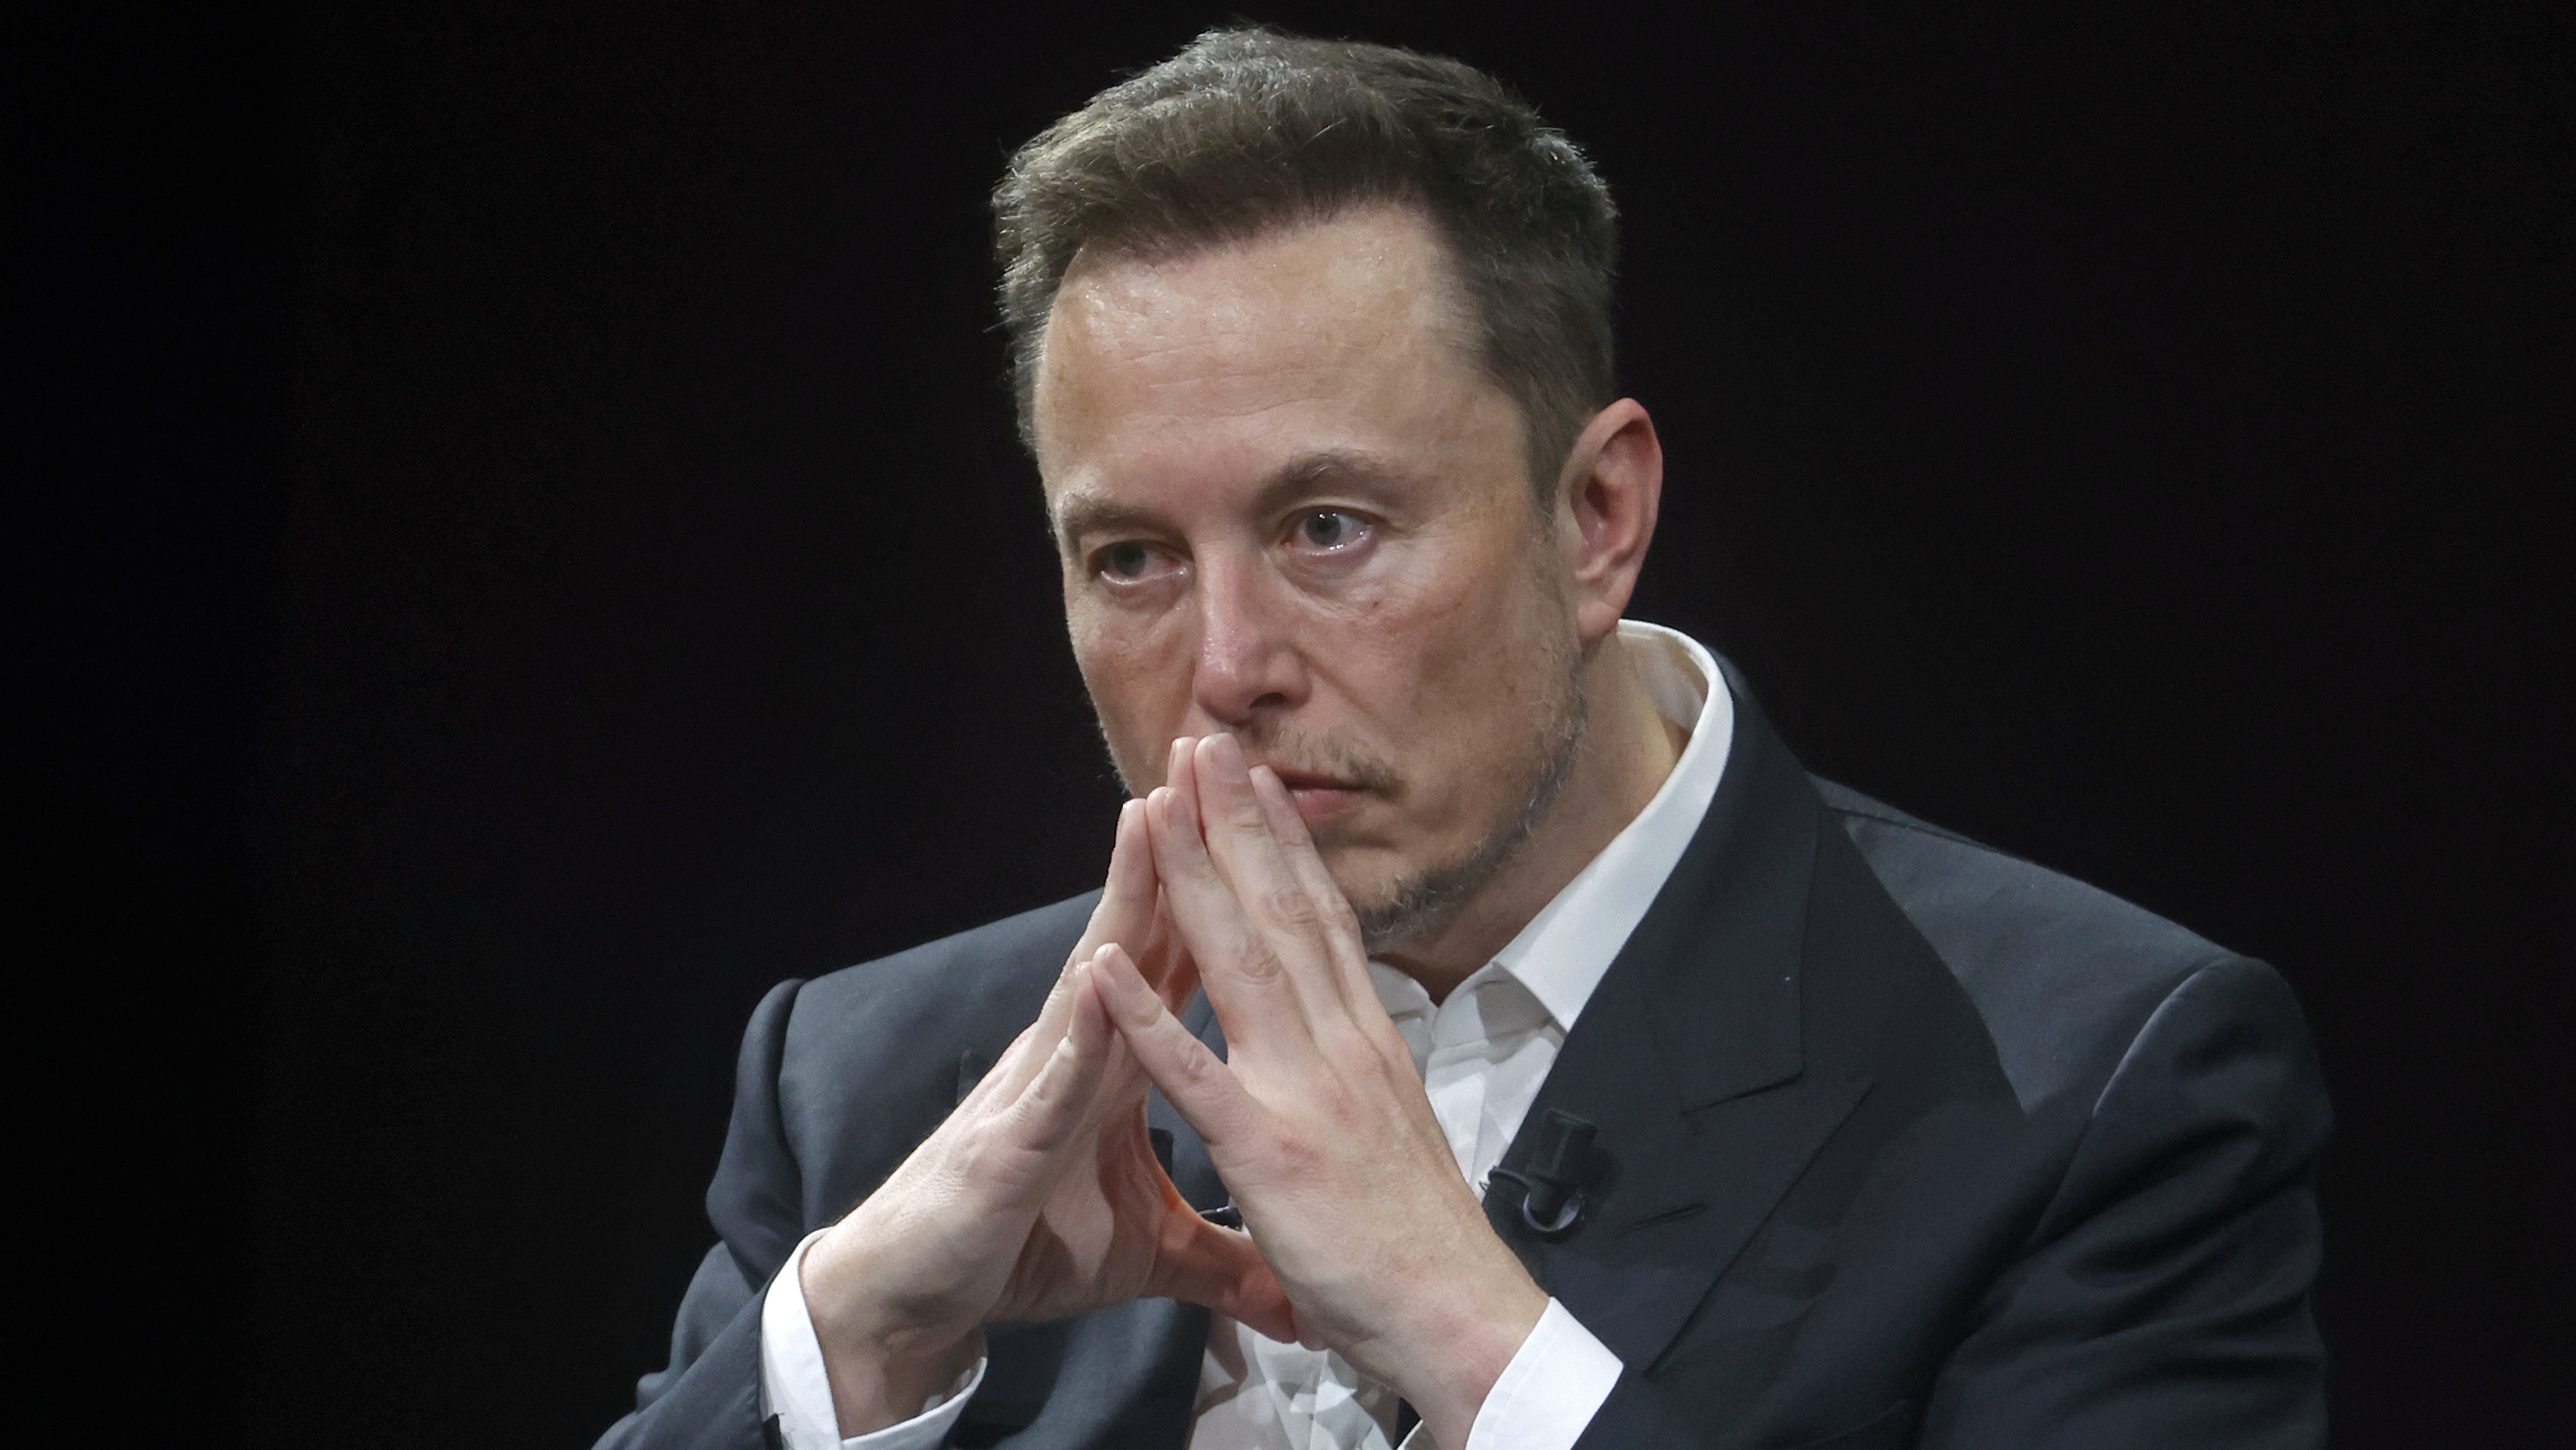  Elon Musk unveils his latest galaxy brain plan to save Twitter: Charging new users $1 per year to tweet 